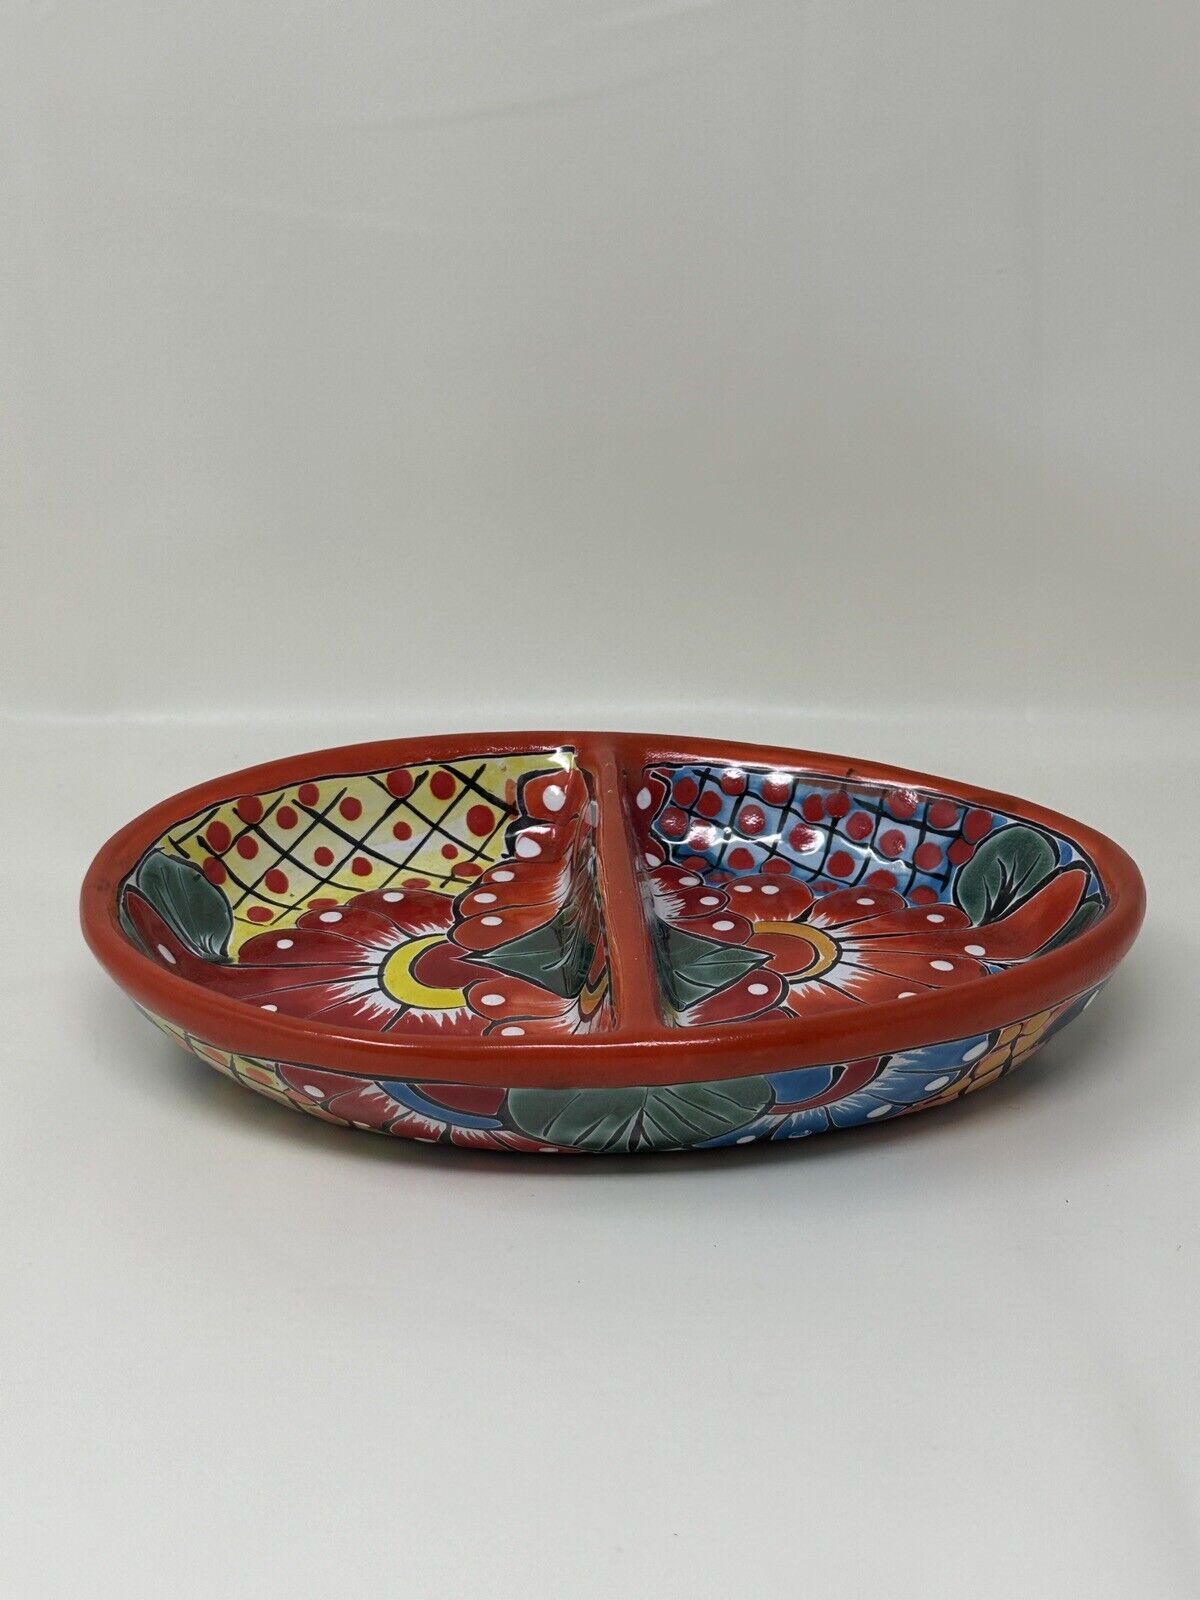 Mexican Ceramic Dish Divided Oval Shaped Signed Multicolor 9 1/2 Inch Long